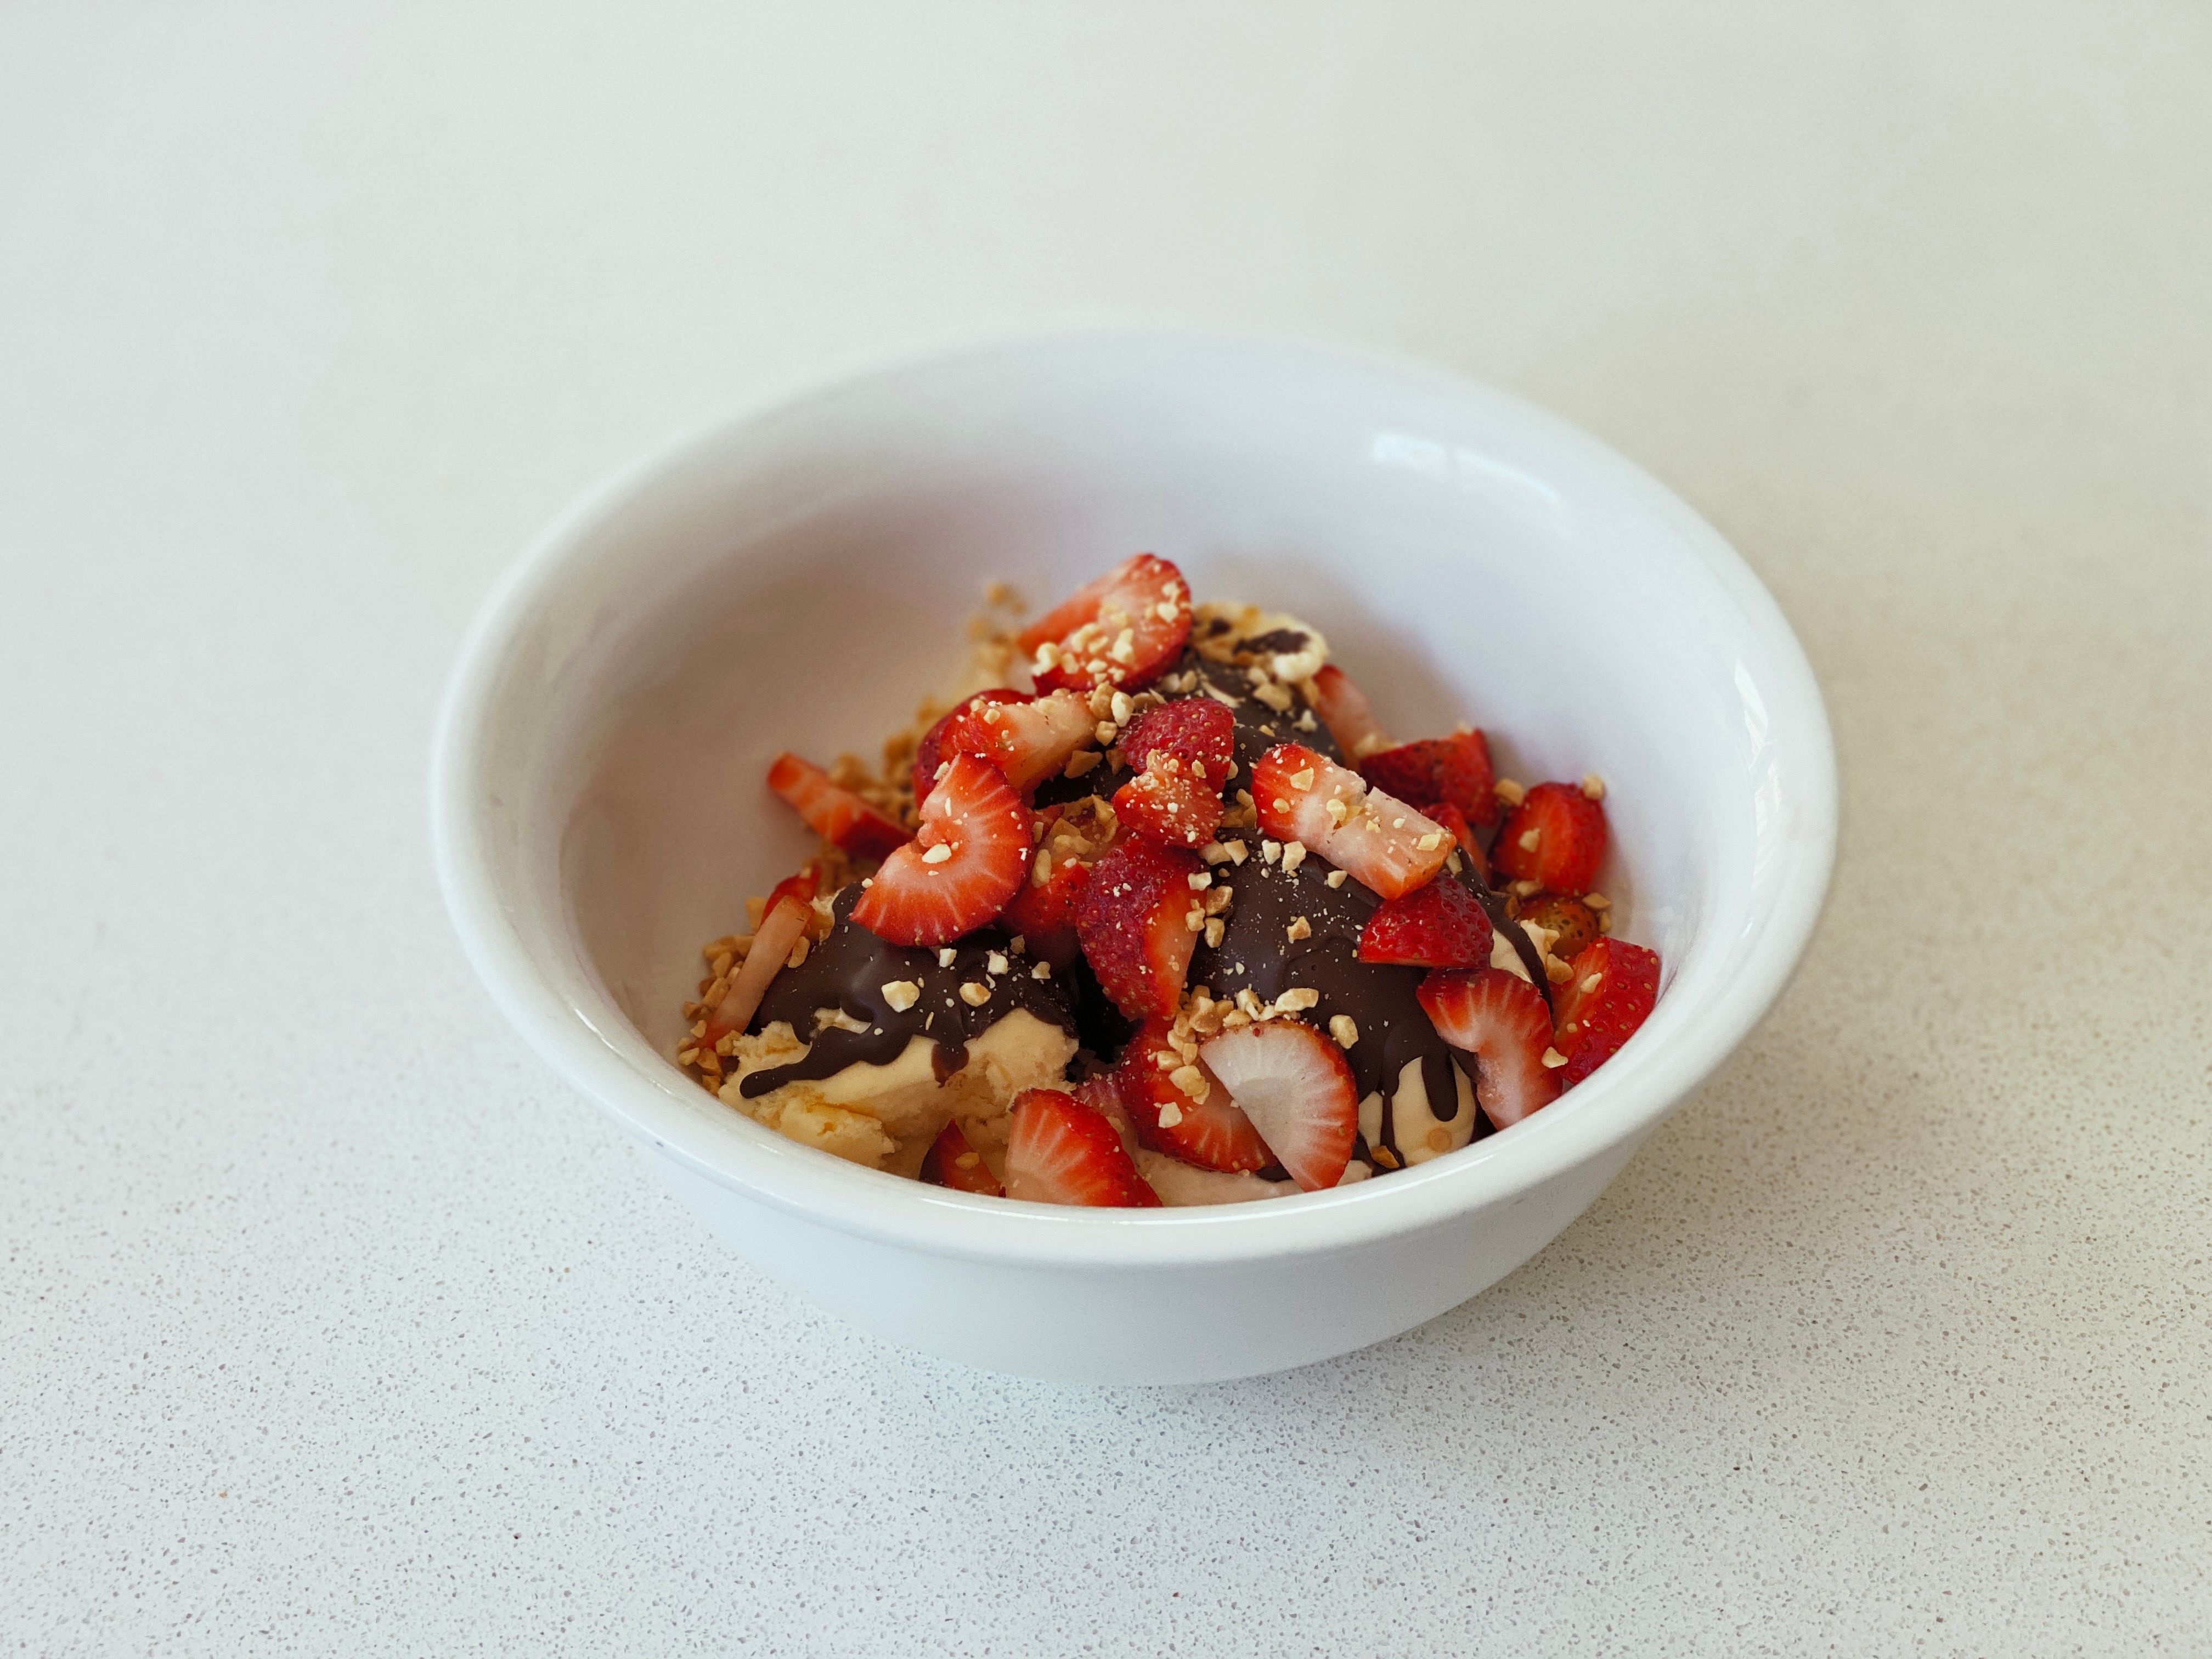 A photo of a bowl of vanilla ice cream with Ice Magic on top, and top of that is a bunch of sliced-up strawberries and crushed peanuts.